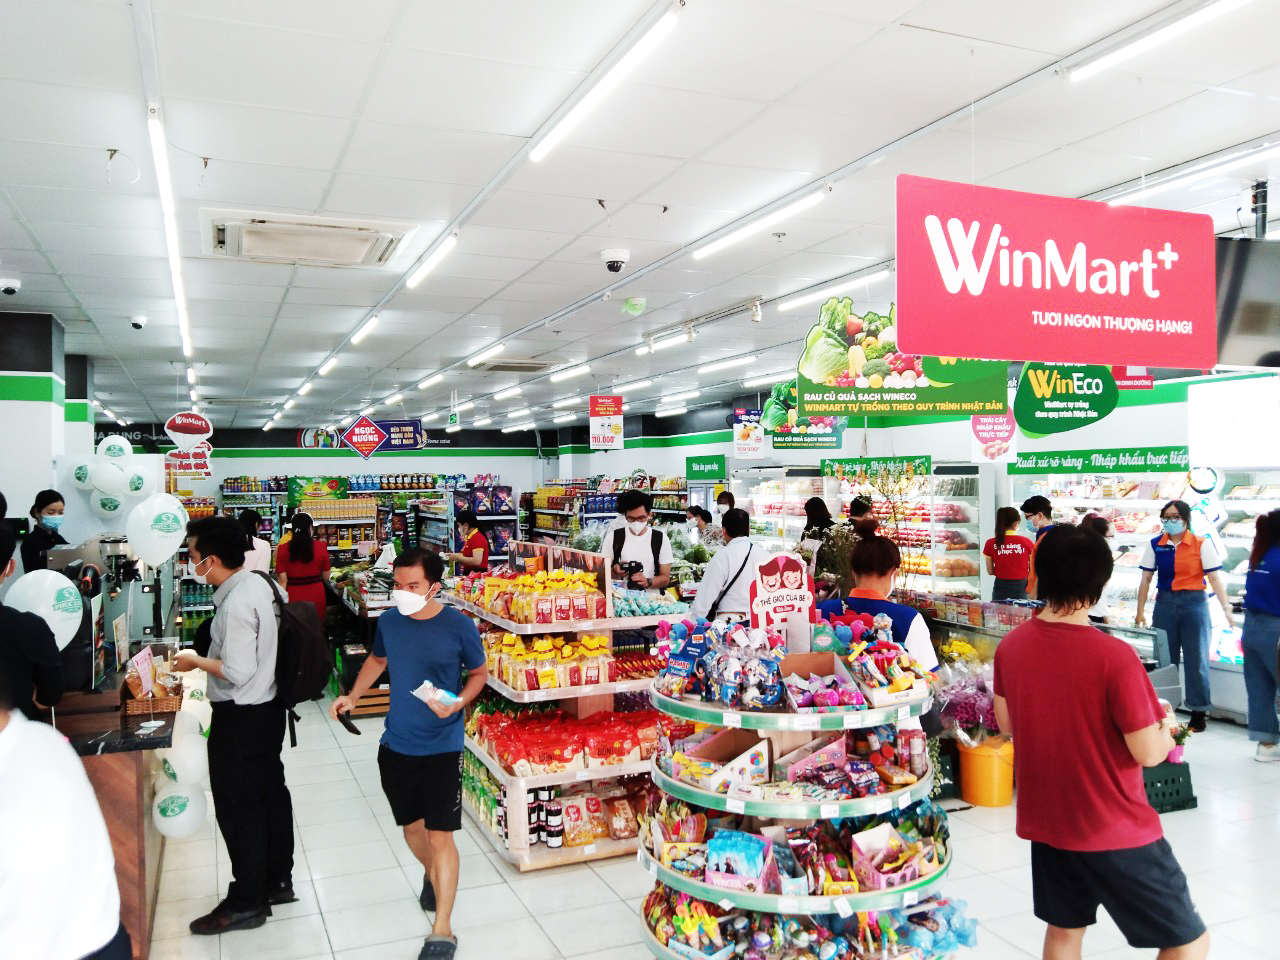 Crowded space at Winmart supermarket